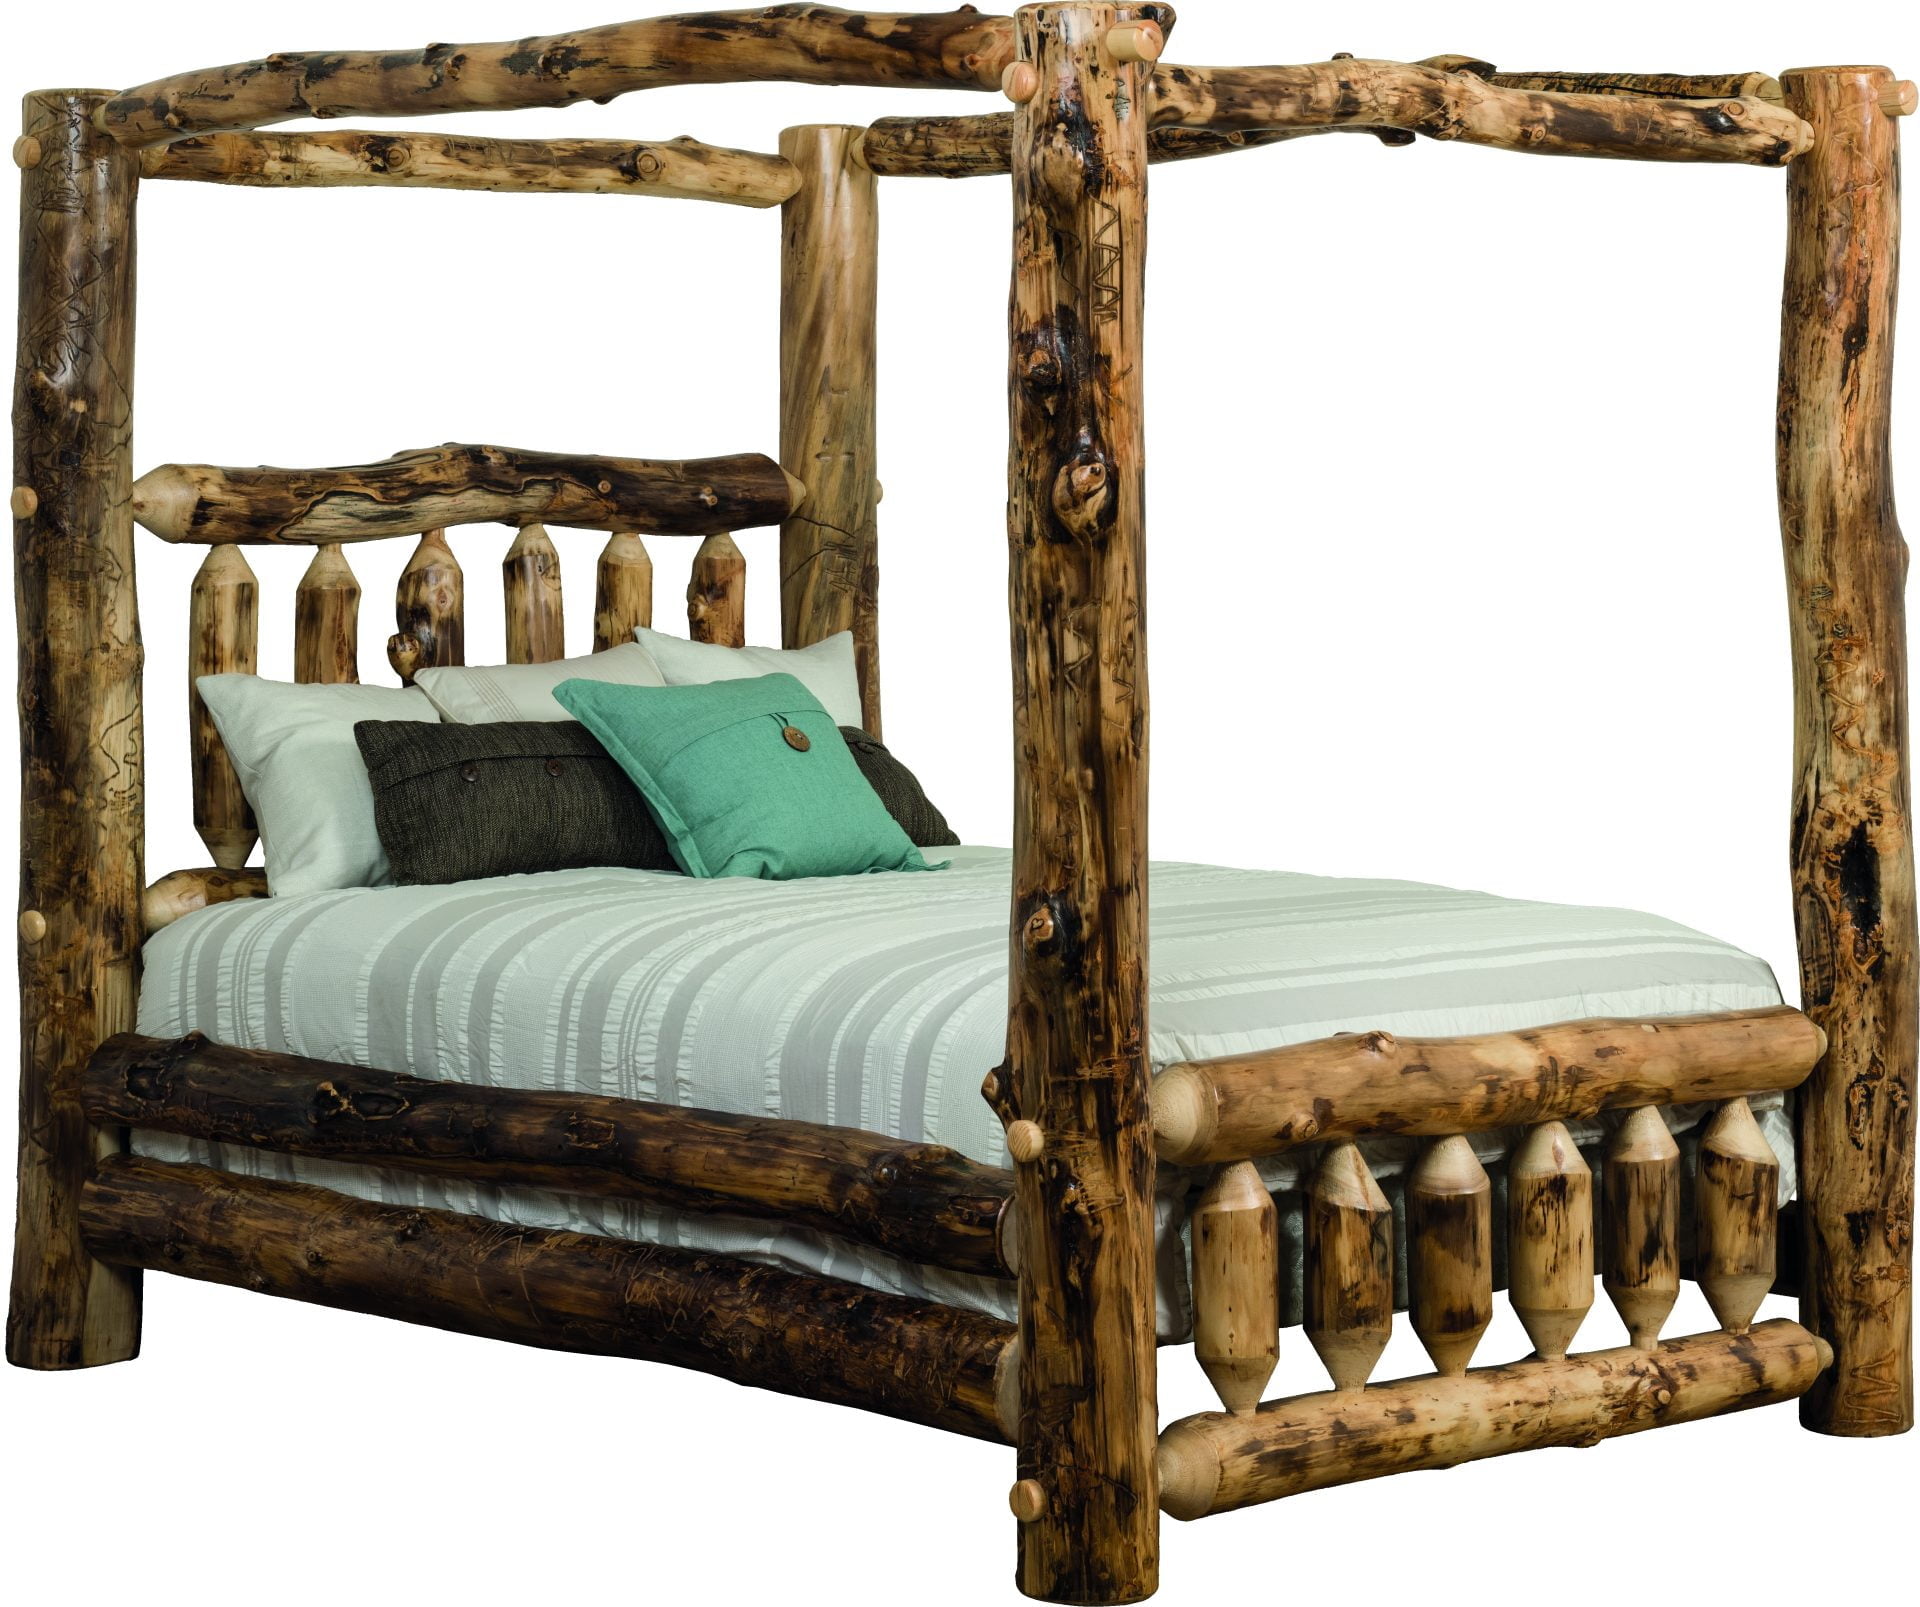 Aspen Canopy Bed – Queen or King Size